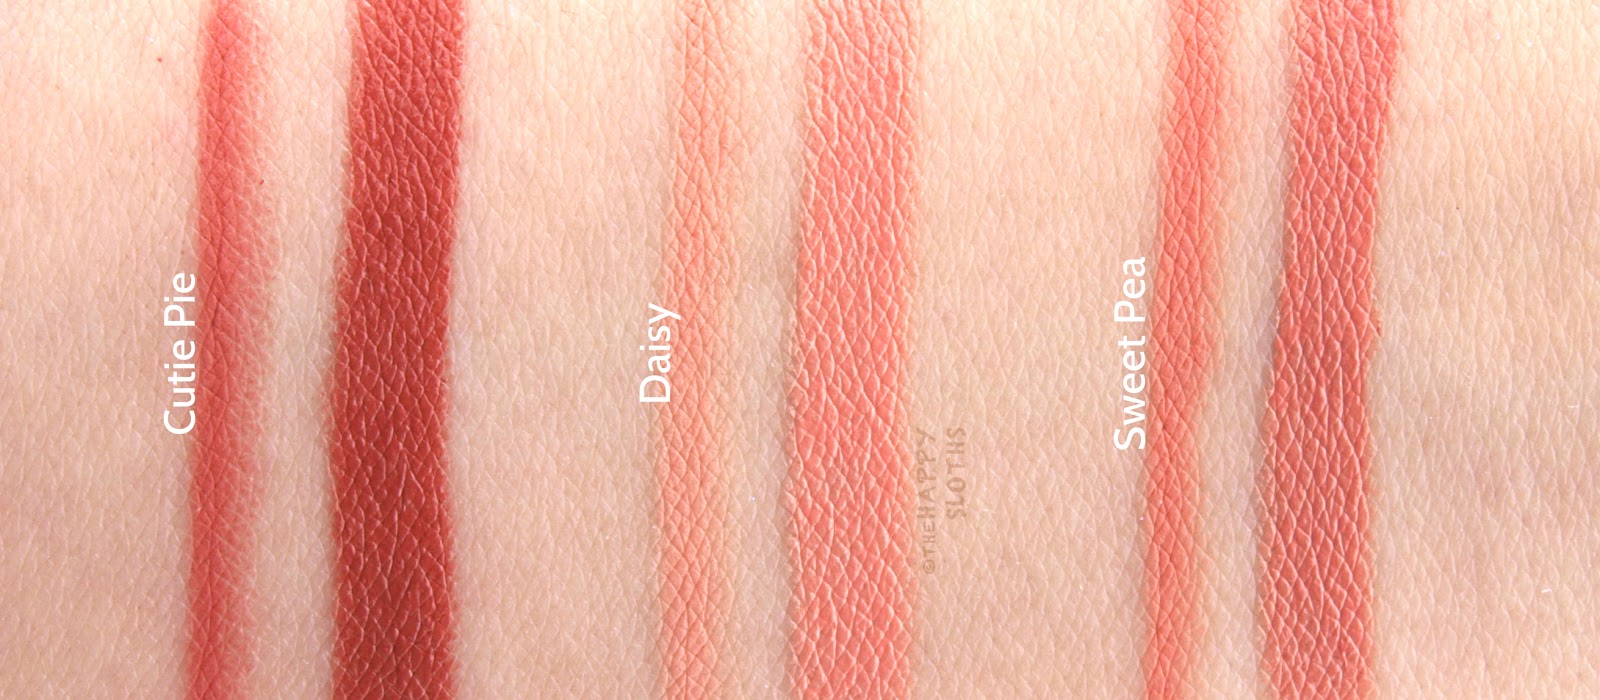 Tarte The Lip Architect Lipstick & Liner: Review and Swatches